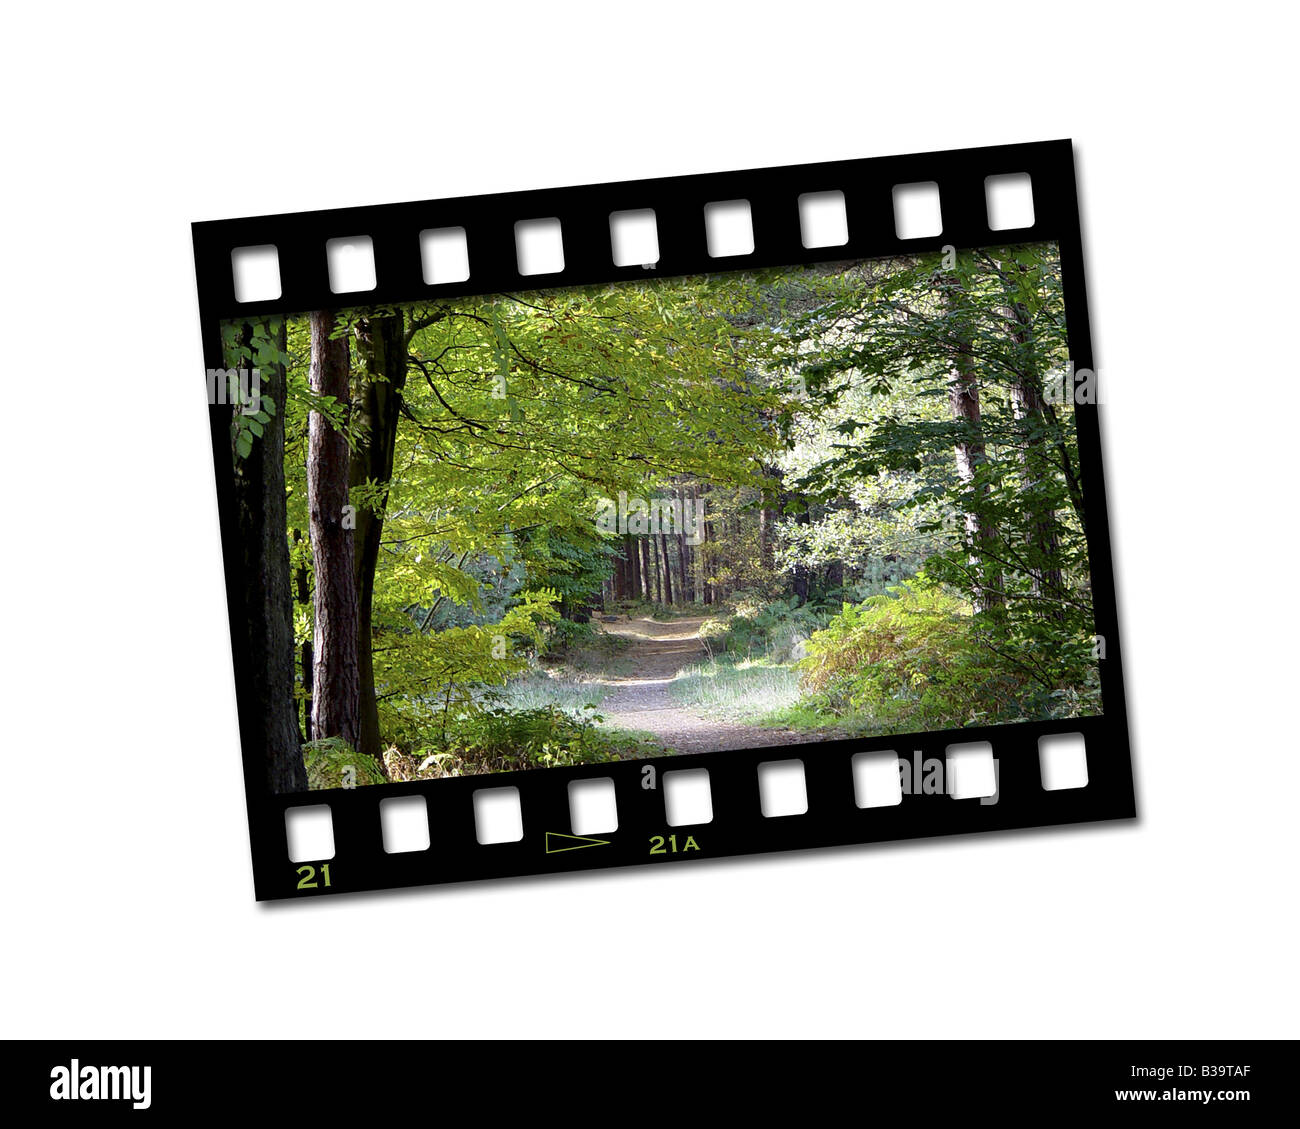 Filmstrip with countryside image Stock Photo